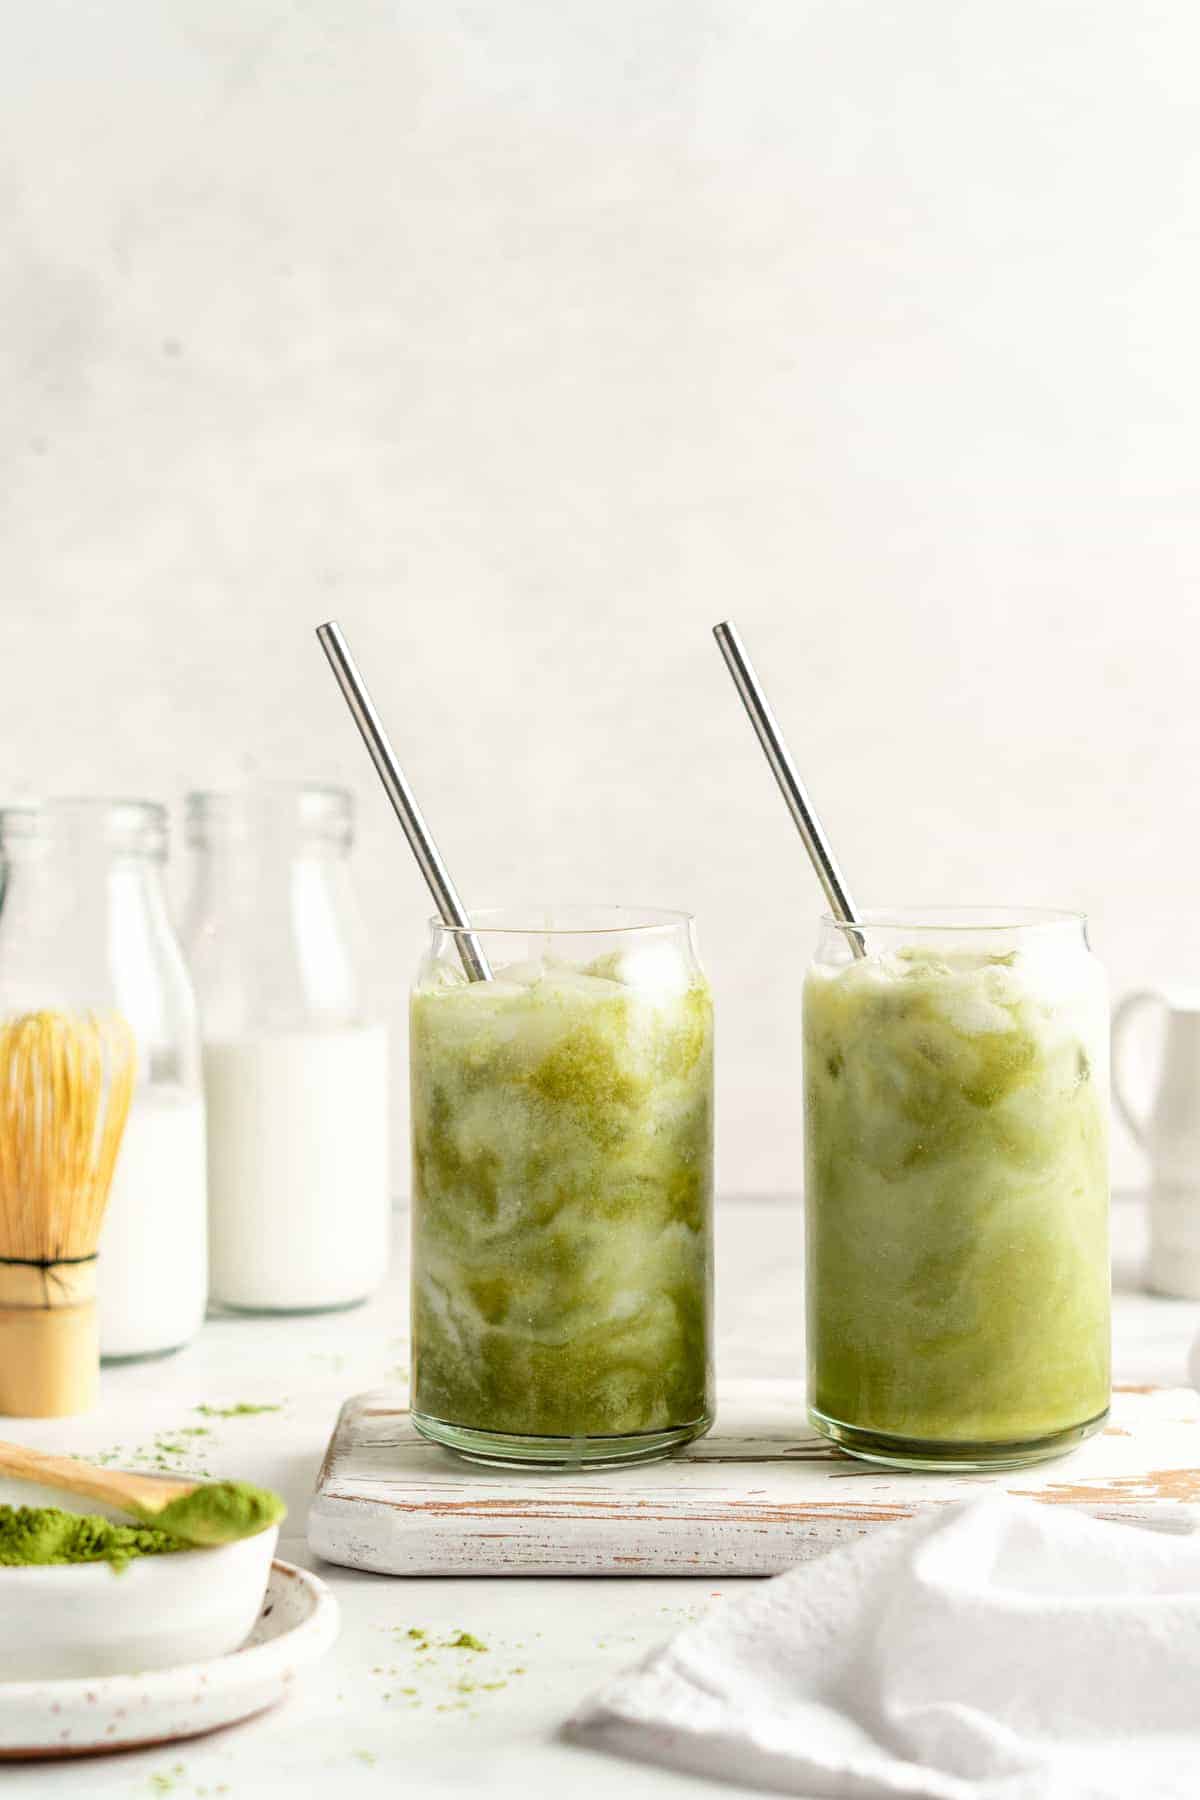 Two iced matcha lattes in glass tumblers with stainless steel straws; swirls of milk visible in glasses